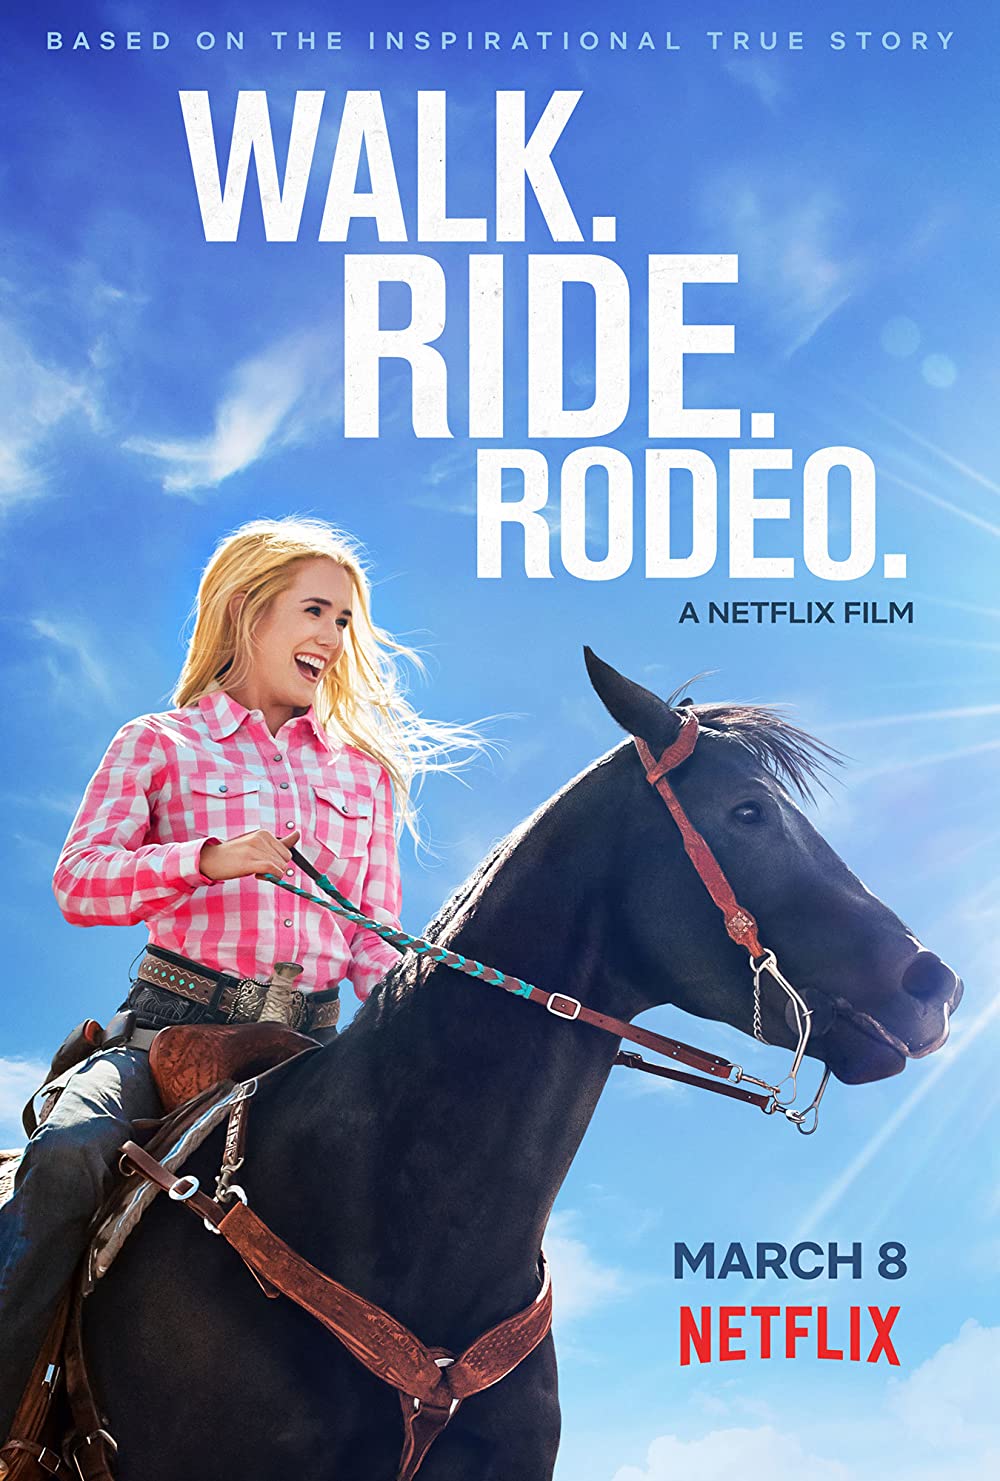 Walk. Ride. Rodeo. Girl on a horse